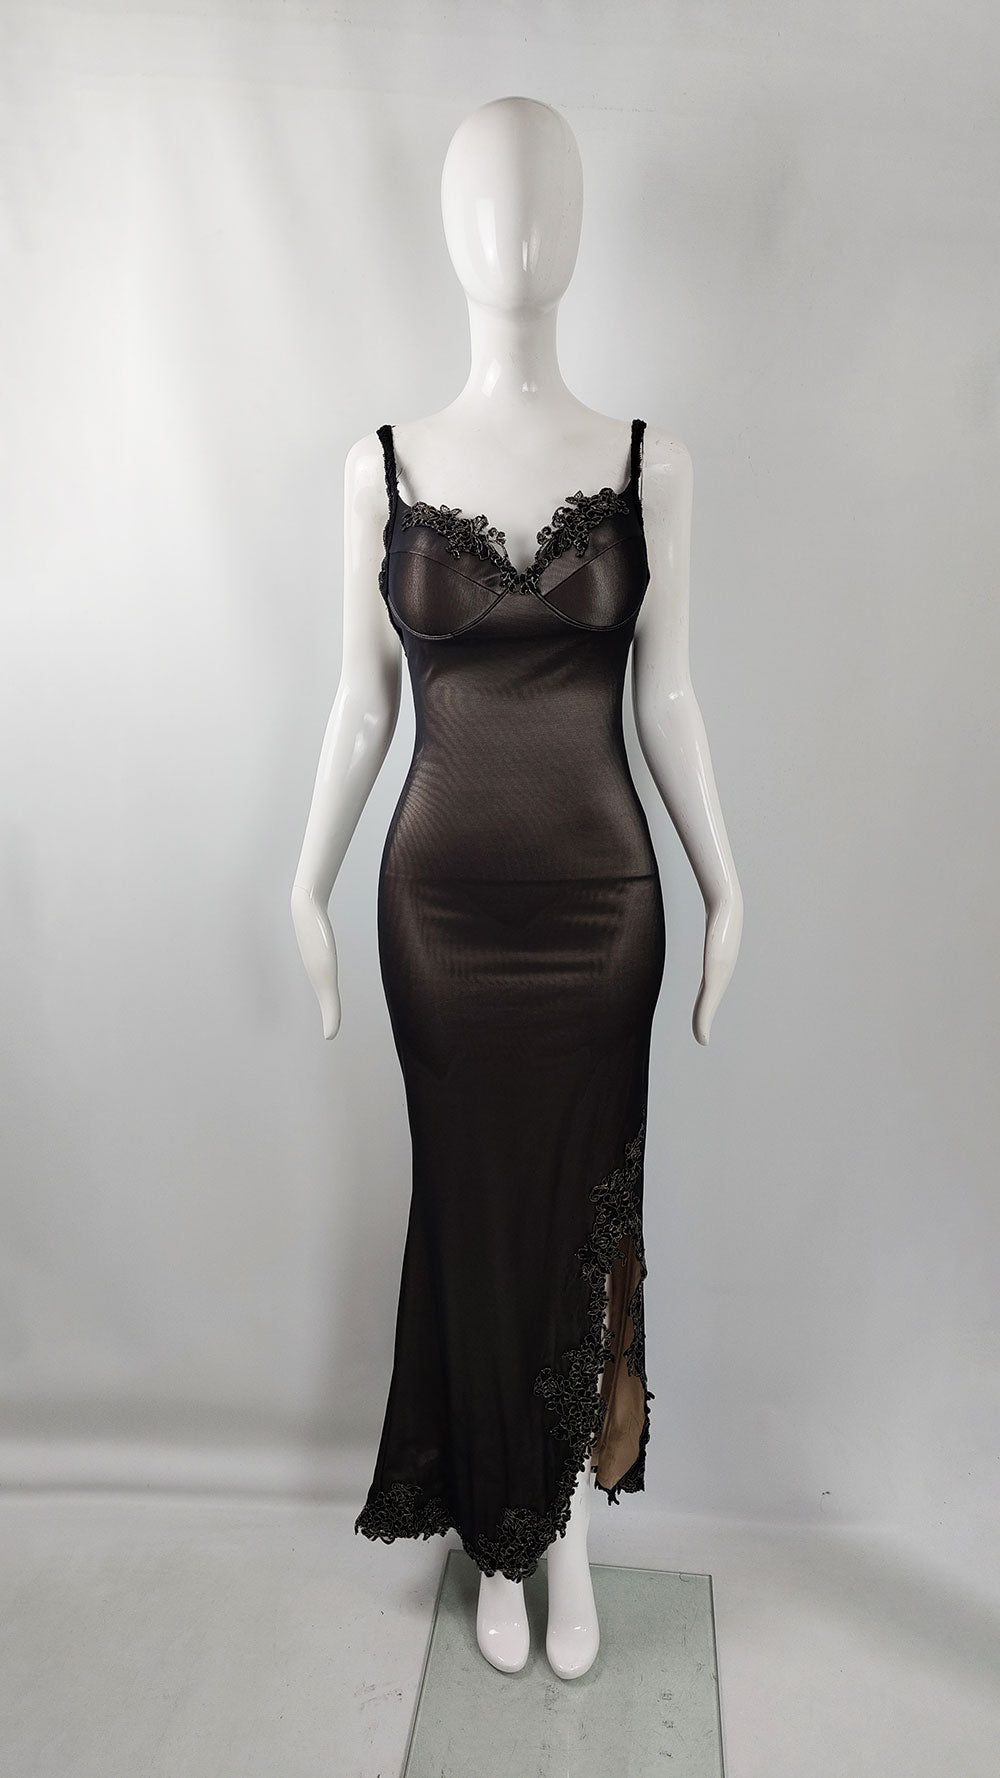 A vintage y2k maxi bodycon black mesh dress by by British designers, Catwalk Collection with lace details.